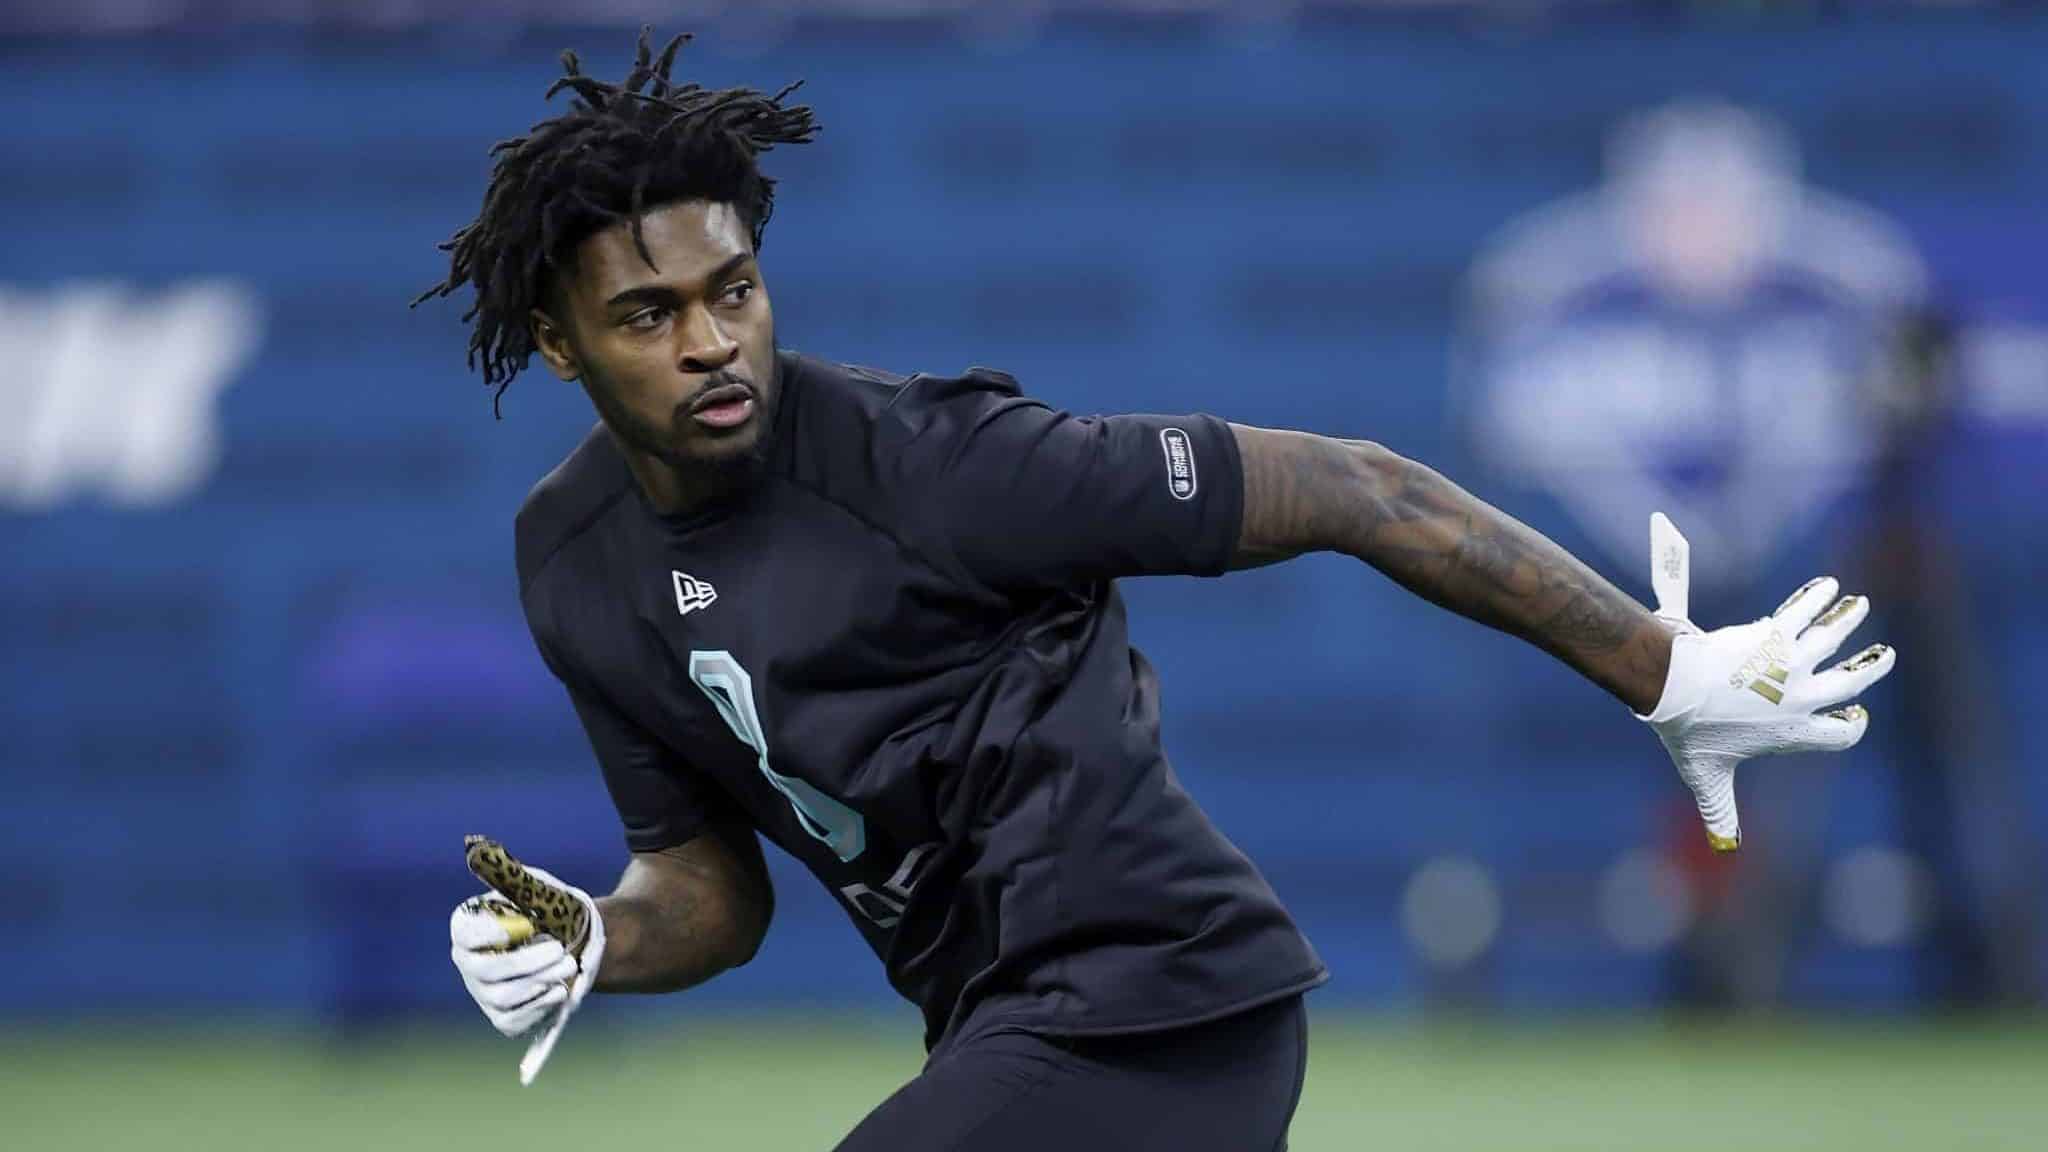 INDIANAPOLIS, IN - MARCH 01: Defensive back Trevon Diggs of Alabama runs a drill during the NFL Combine at Lucas Oil Stadium on February 29, 2020 in Indianapolis, Indiana. New York Jets